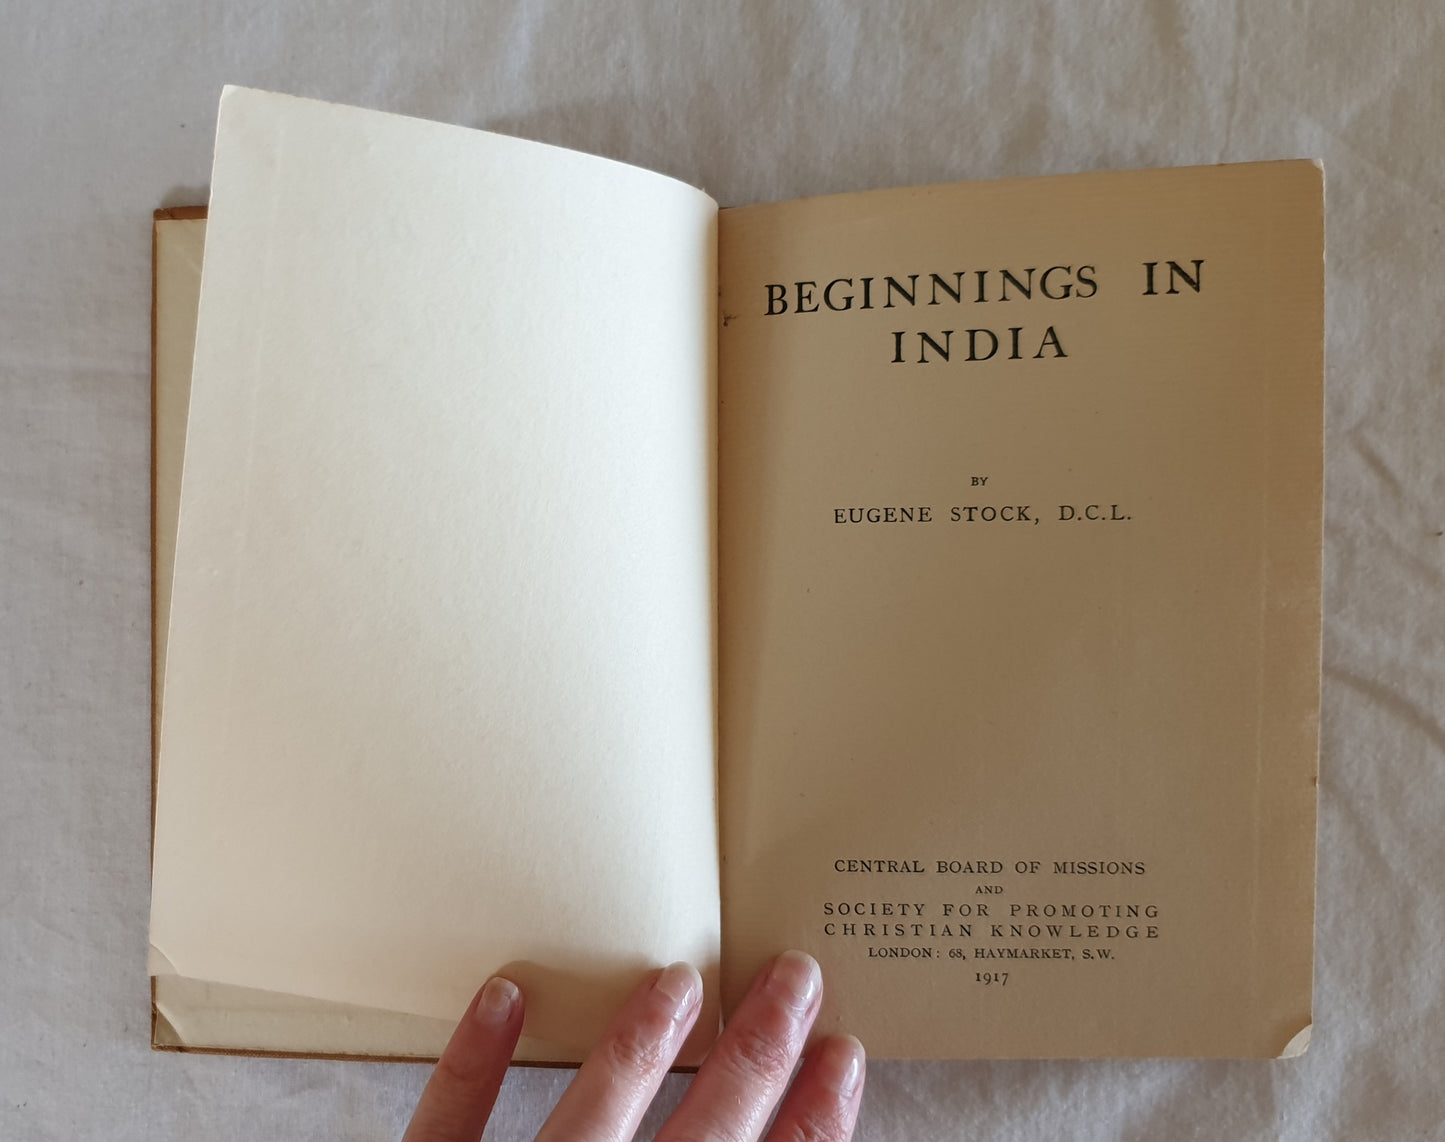 Beginnings In India by Eugene Stock